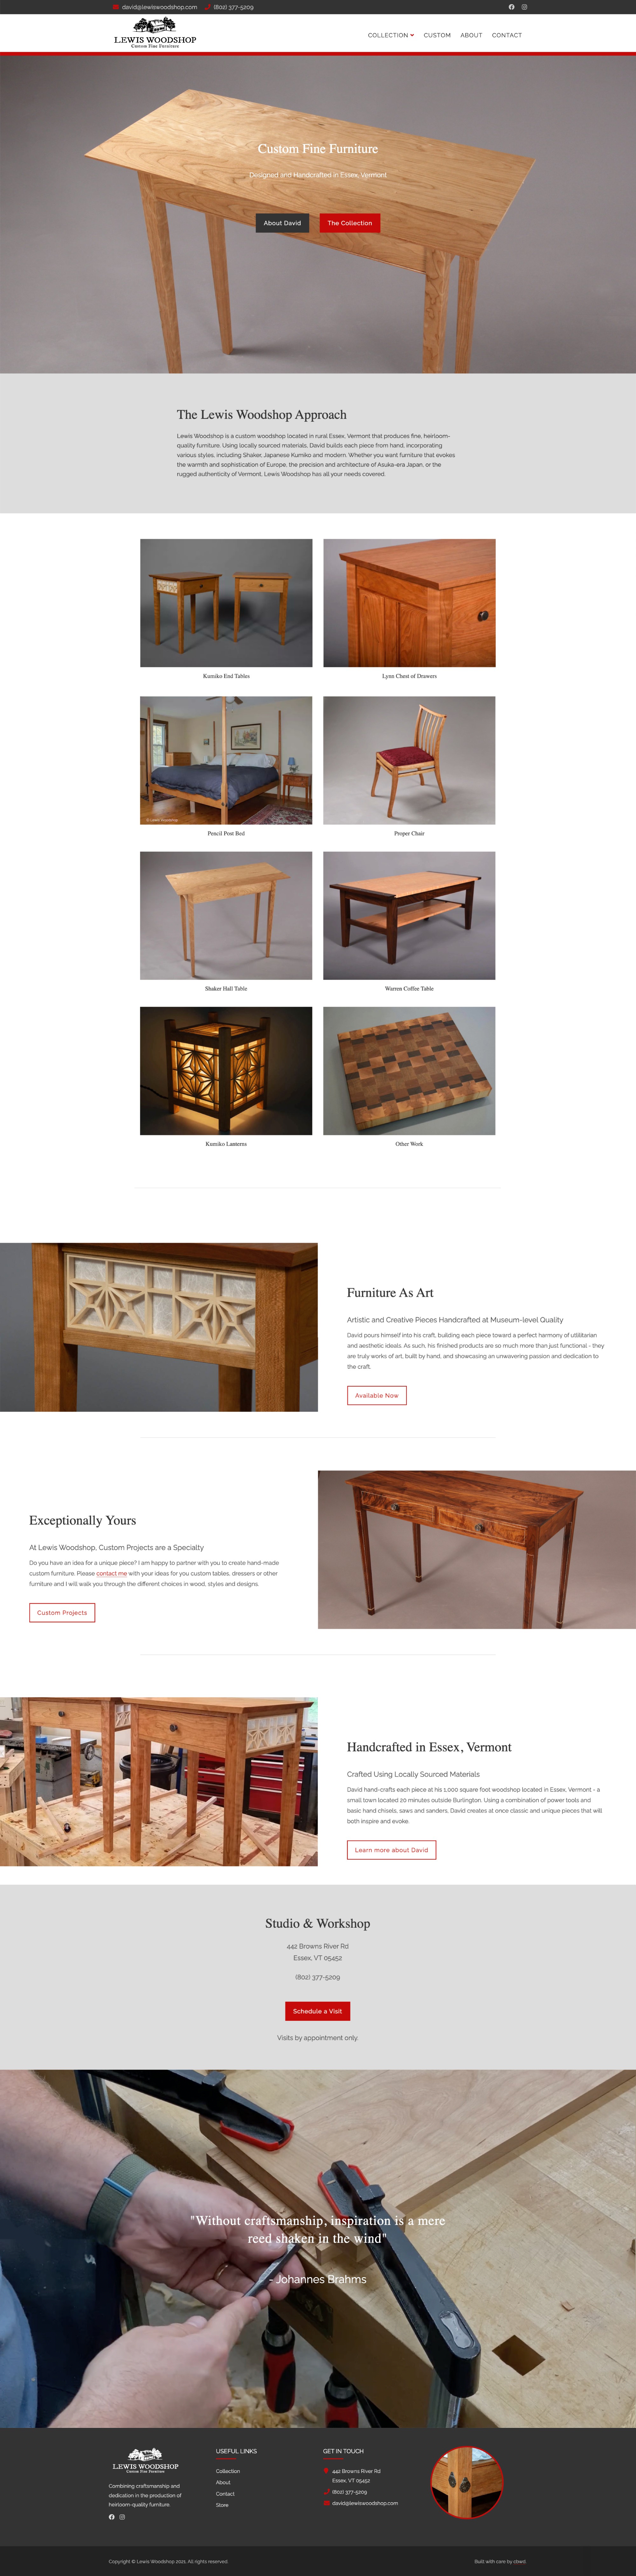 Lewis Woodshop home page full